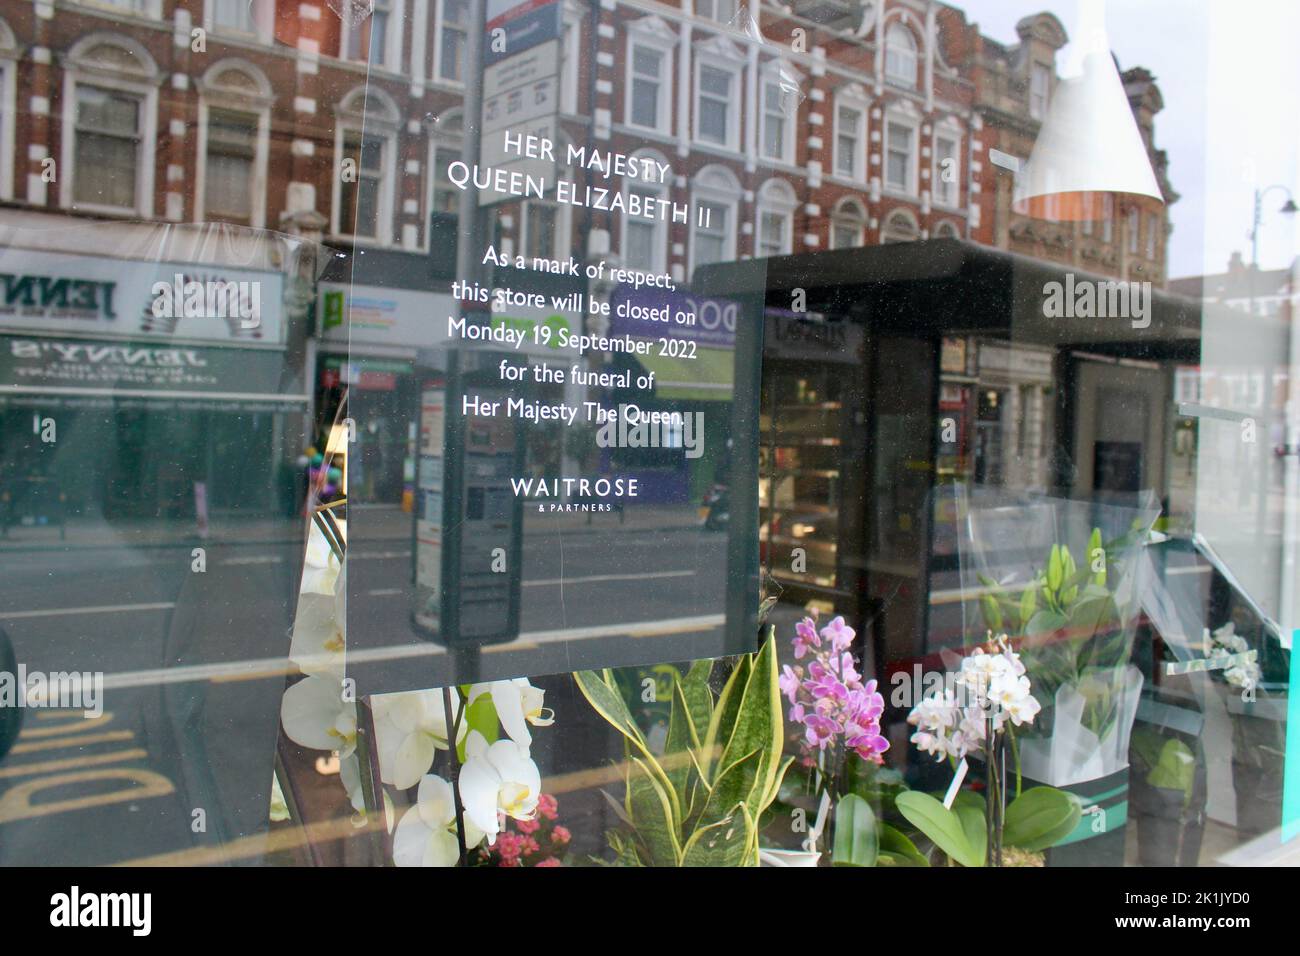 waitrose shop window displays and closed signs in muswell hill on 19th september 2022 for the Queen Elizabeth 2 funeral tribute and commemoration Stock Photo